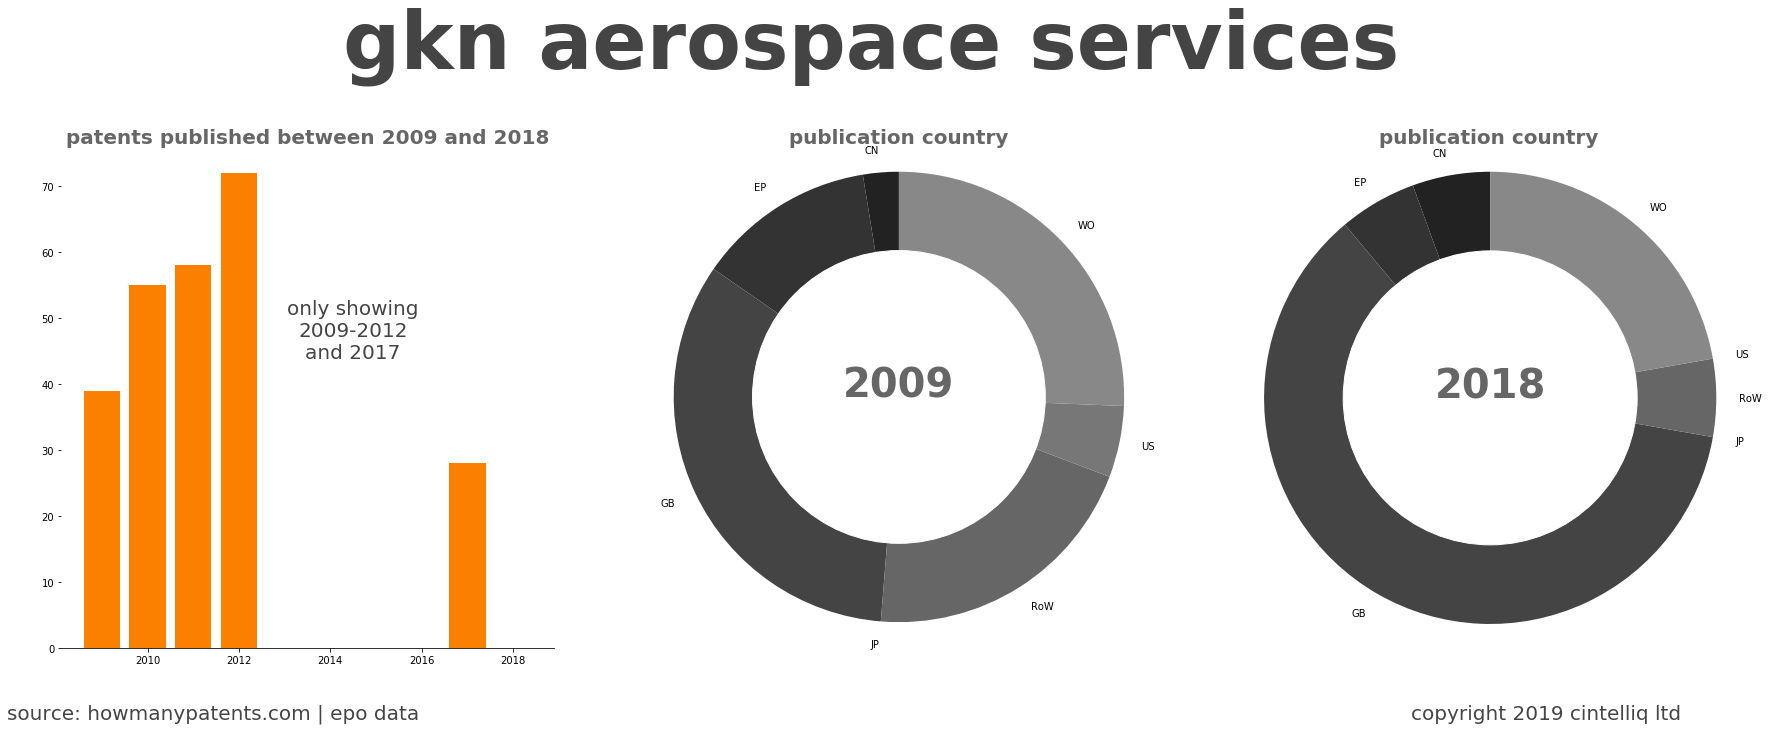 summary of patents for Gkn Aerospace Services